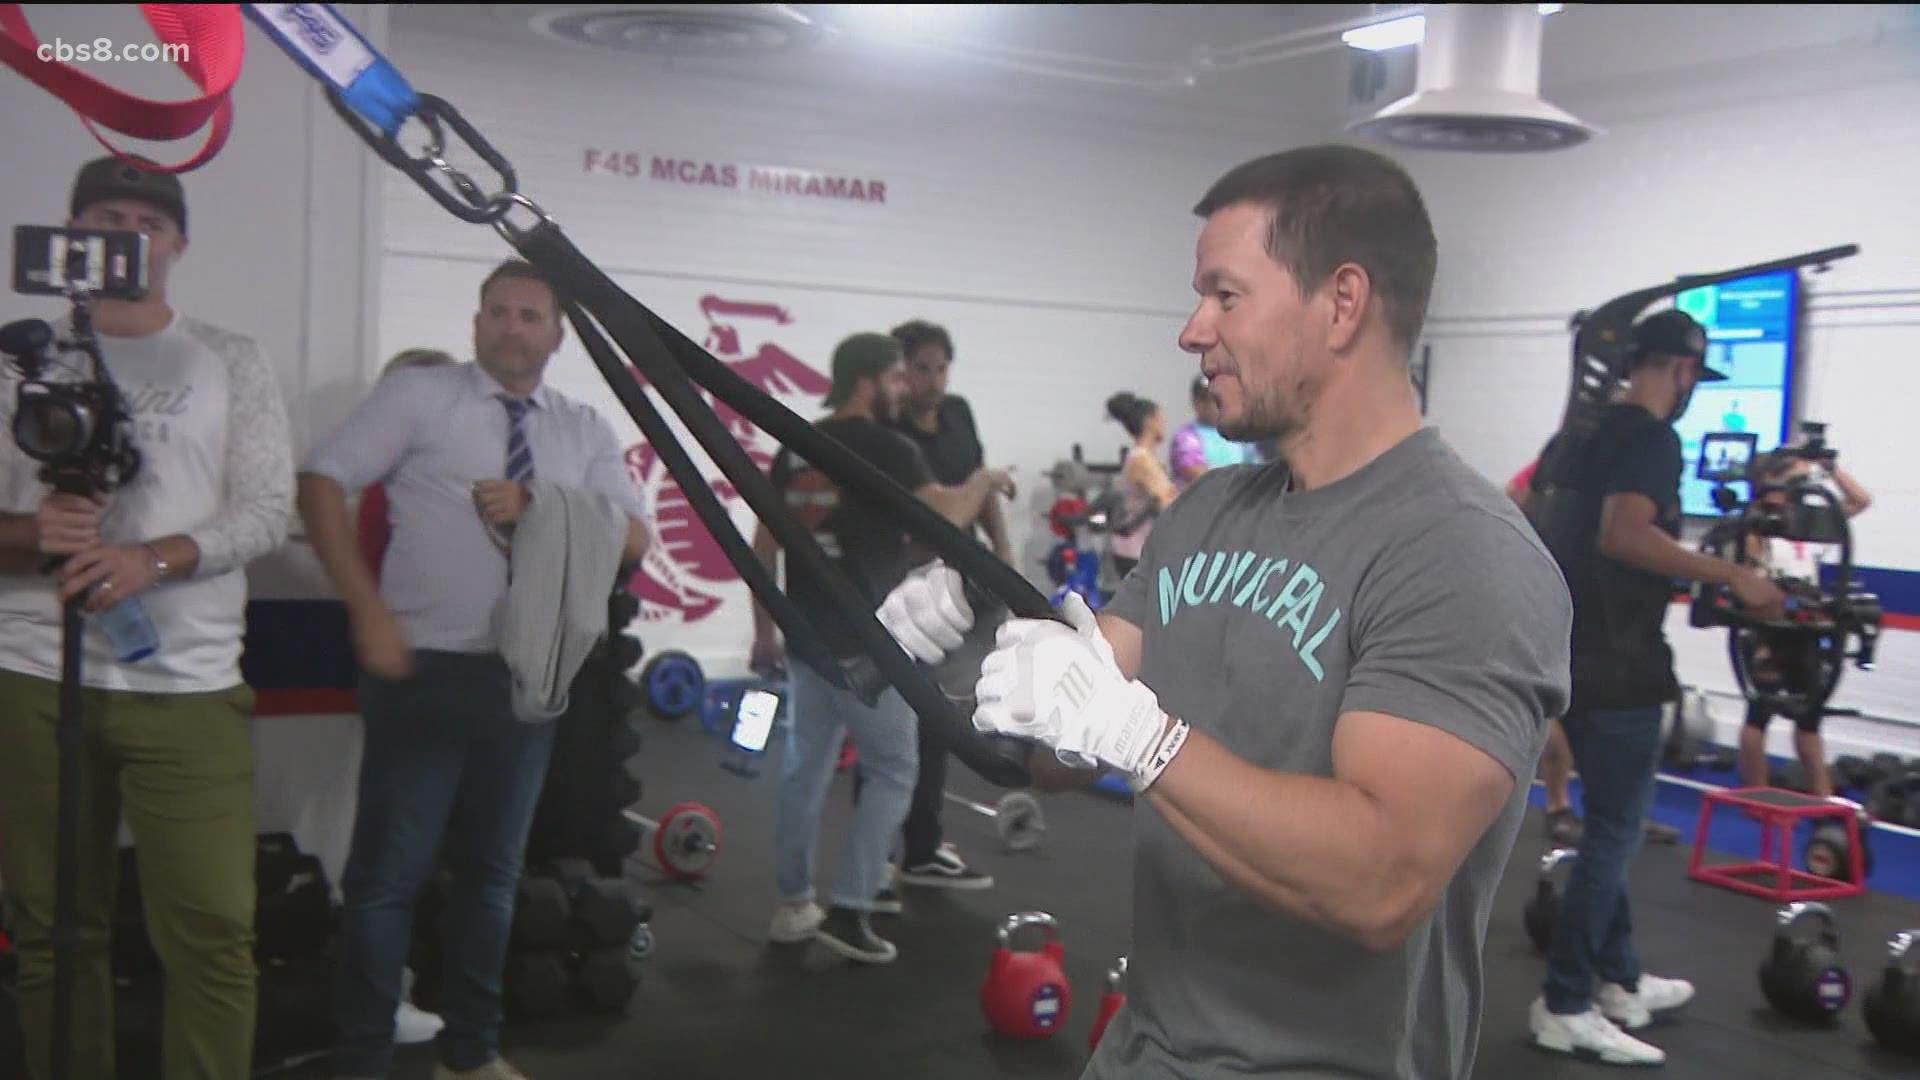 It's called F45. Wahlberg is a spokesperson for the gym.